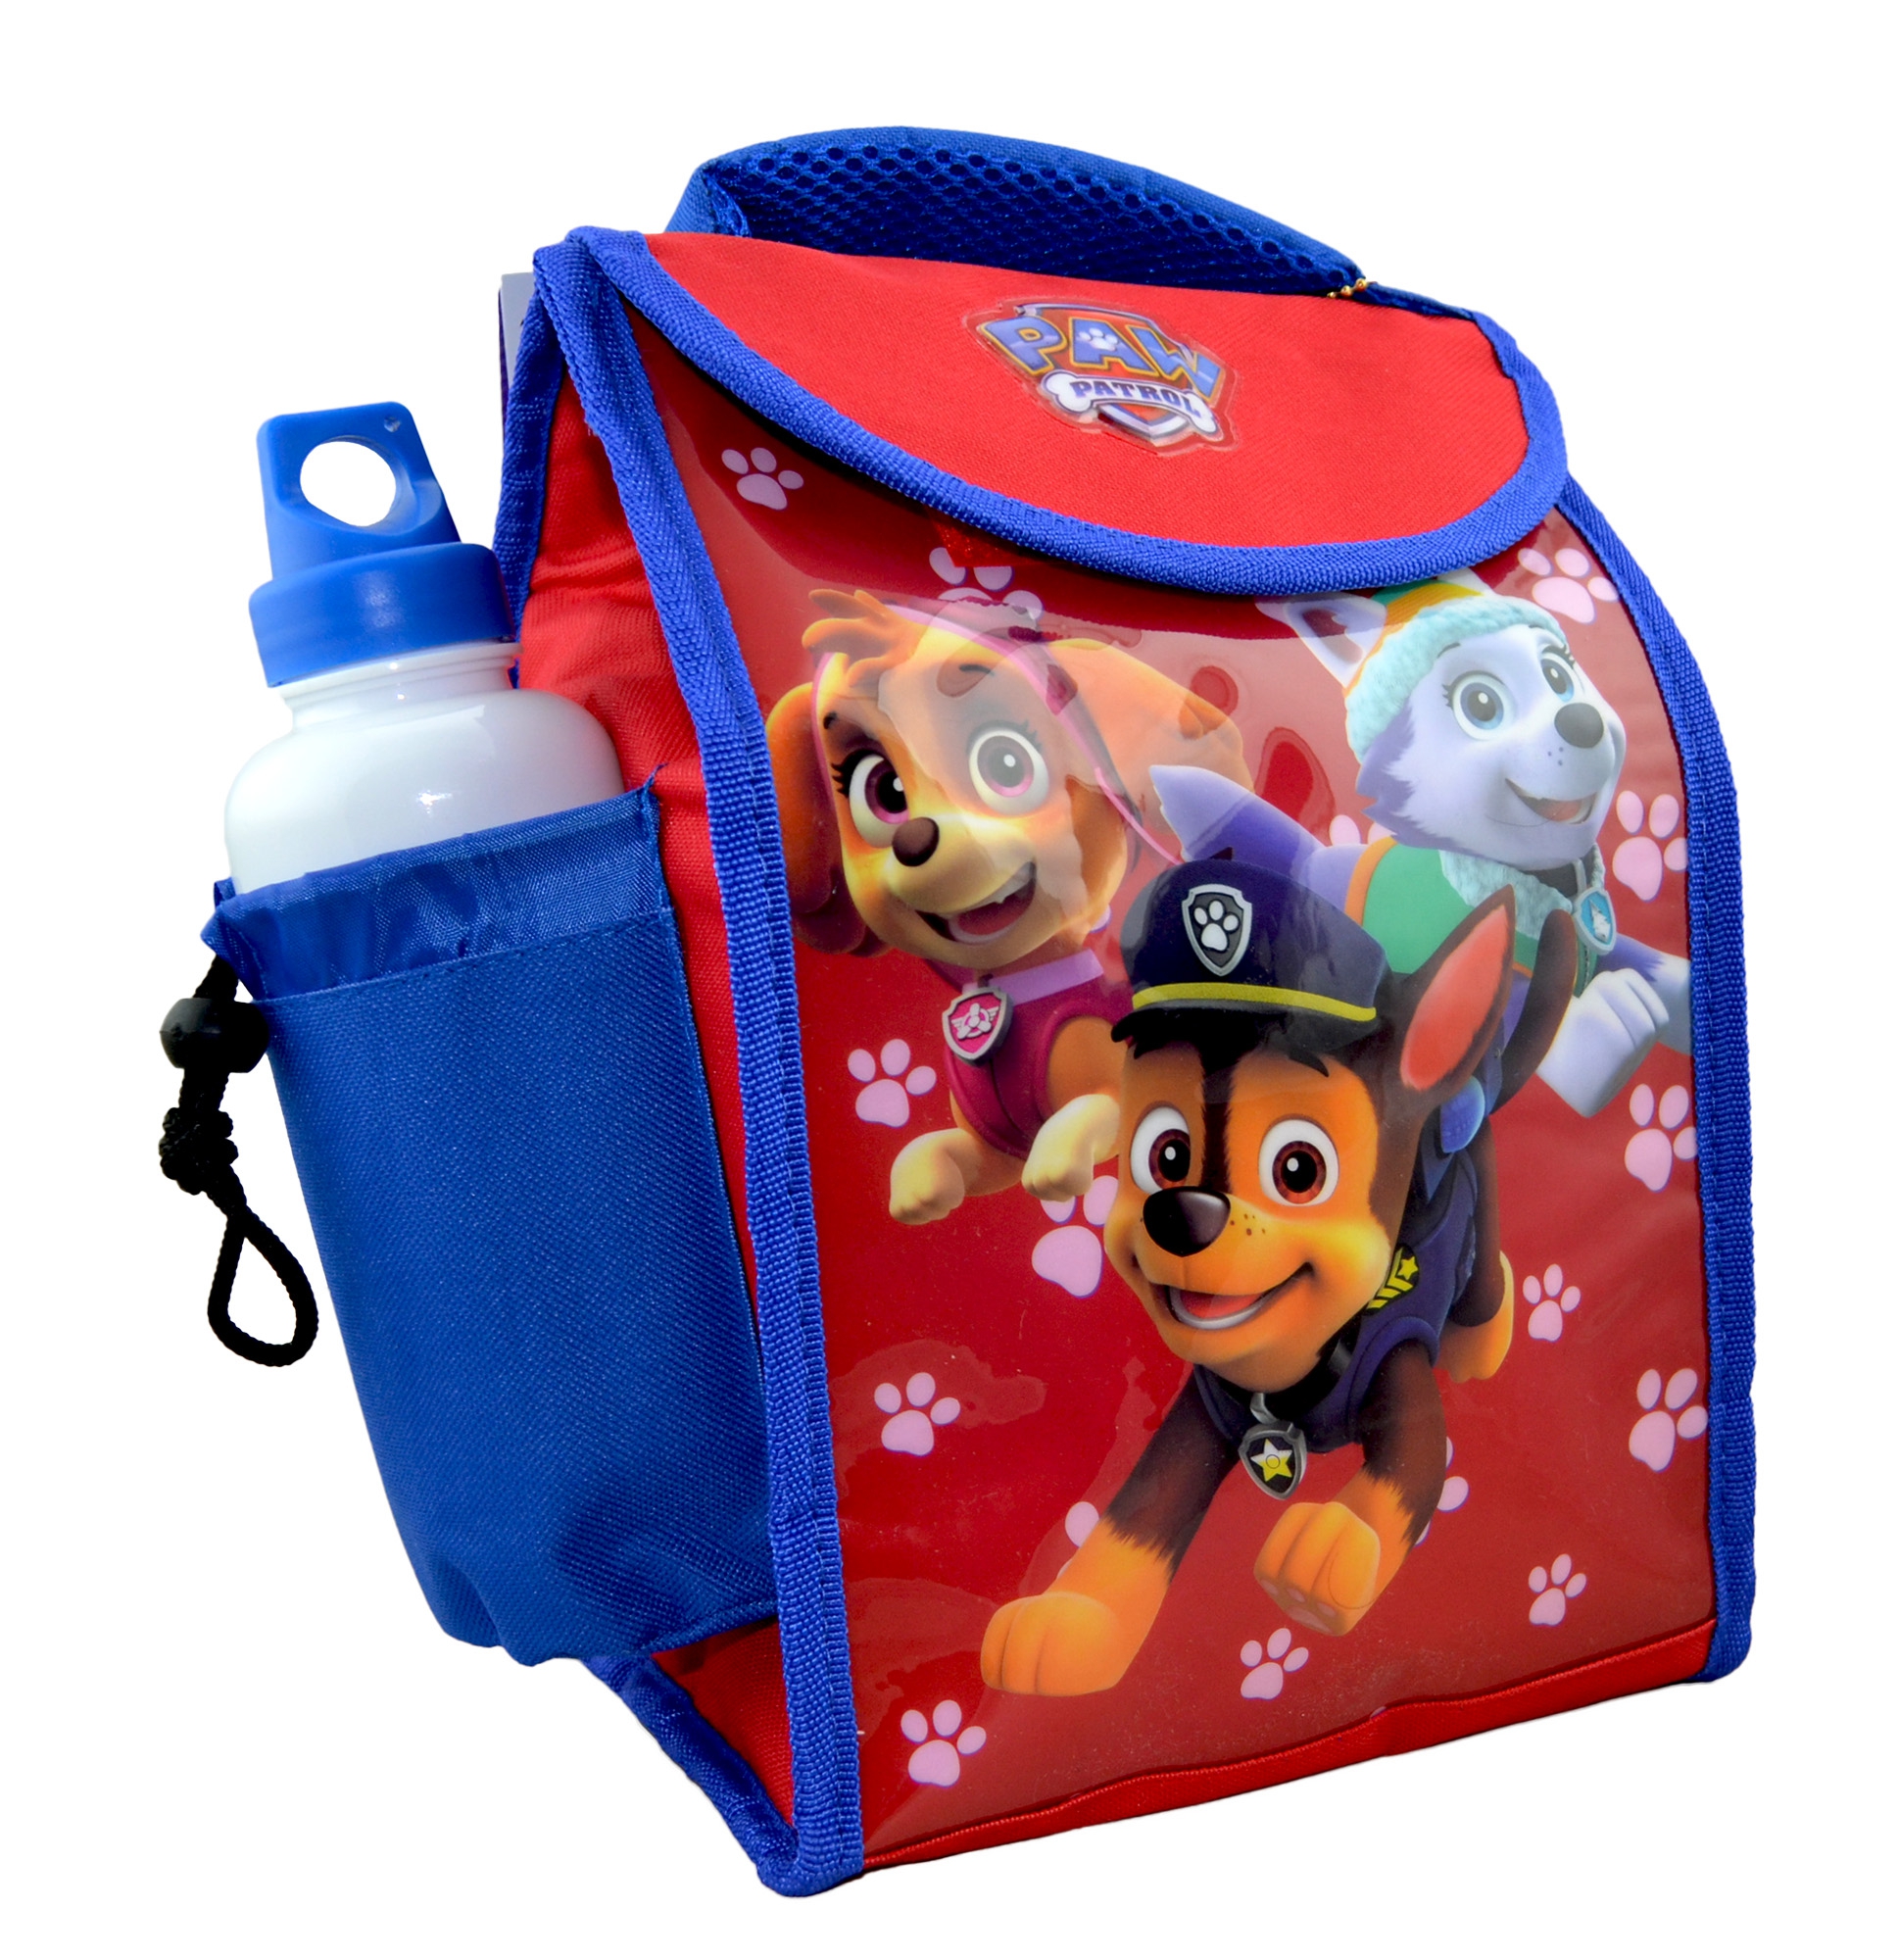 Paw Patrol 'Pawsome' School Lunch Bag with Bottle